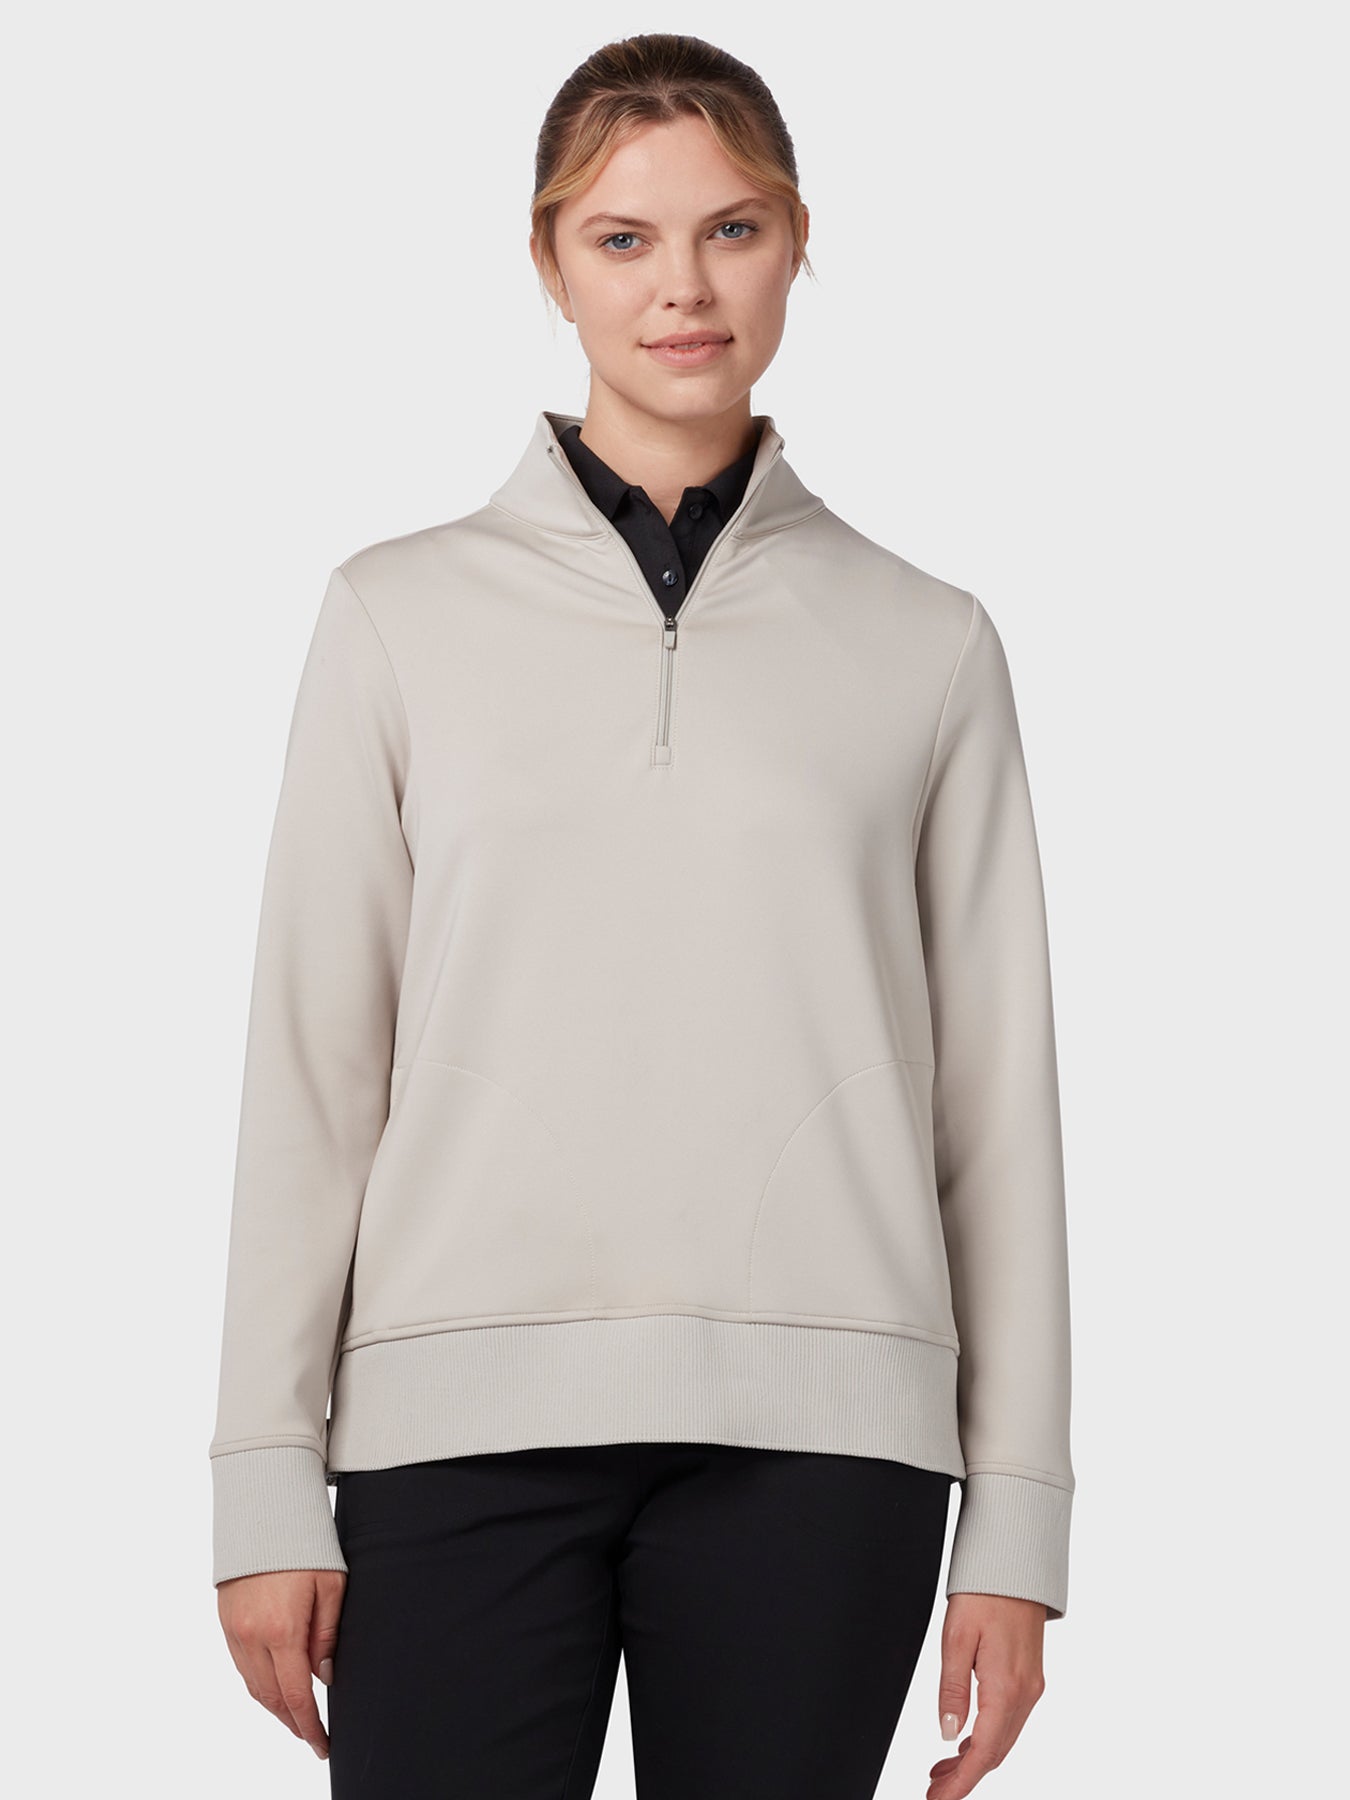 View Midweight Womens Fleece Crossover In Chateau Grey information